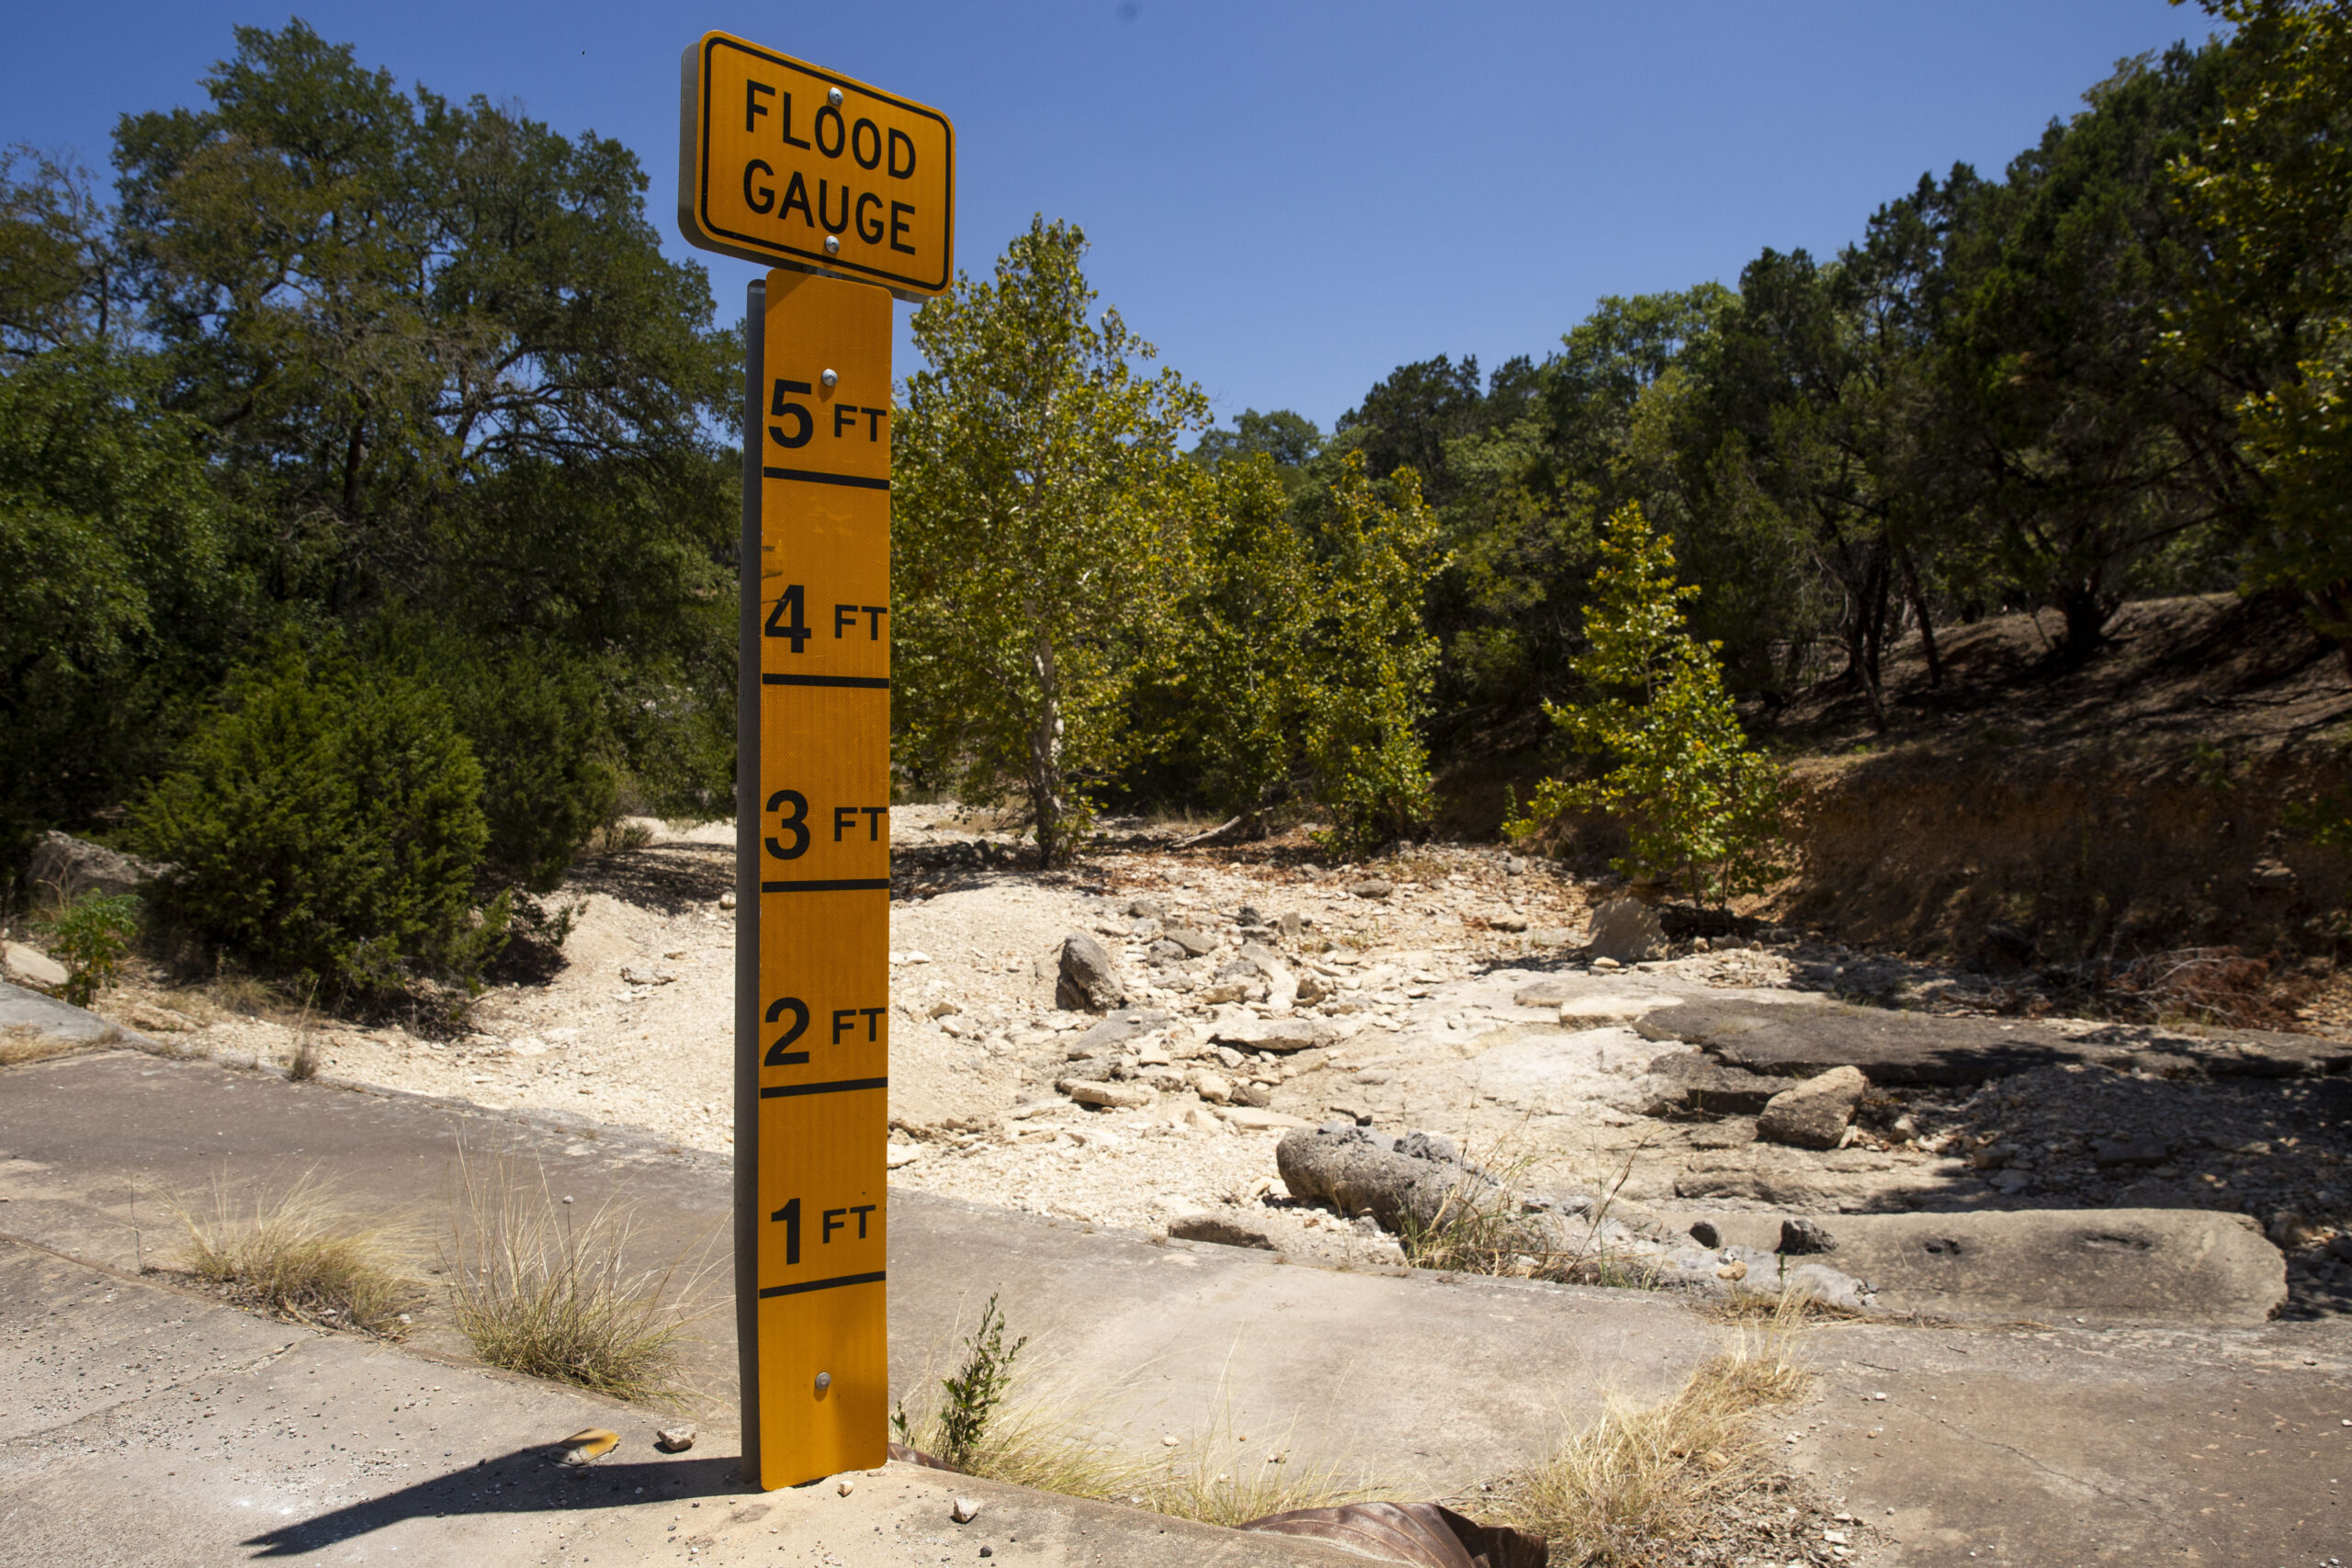 A flood gauge stands next to an entirely dry creek bed, bordered by a forest.